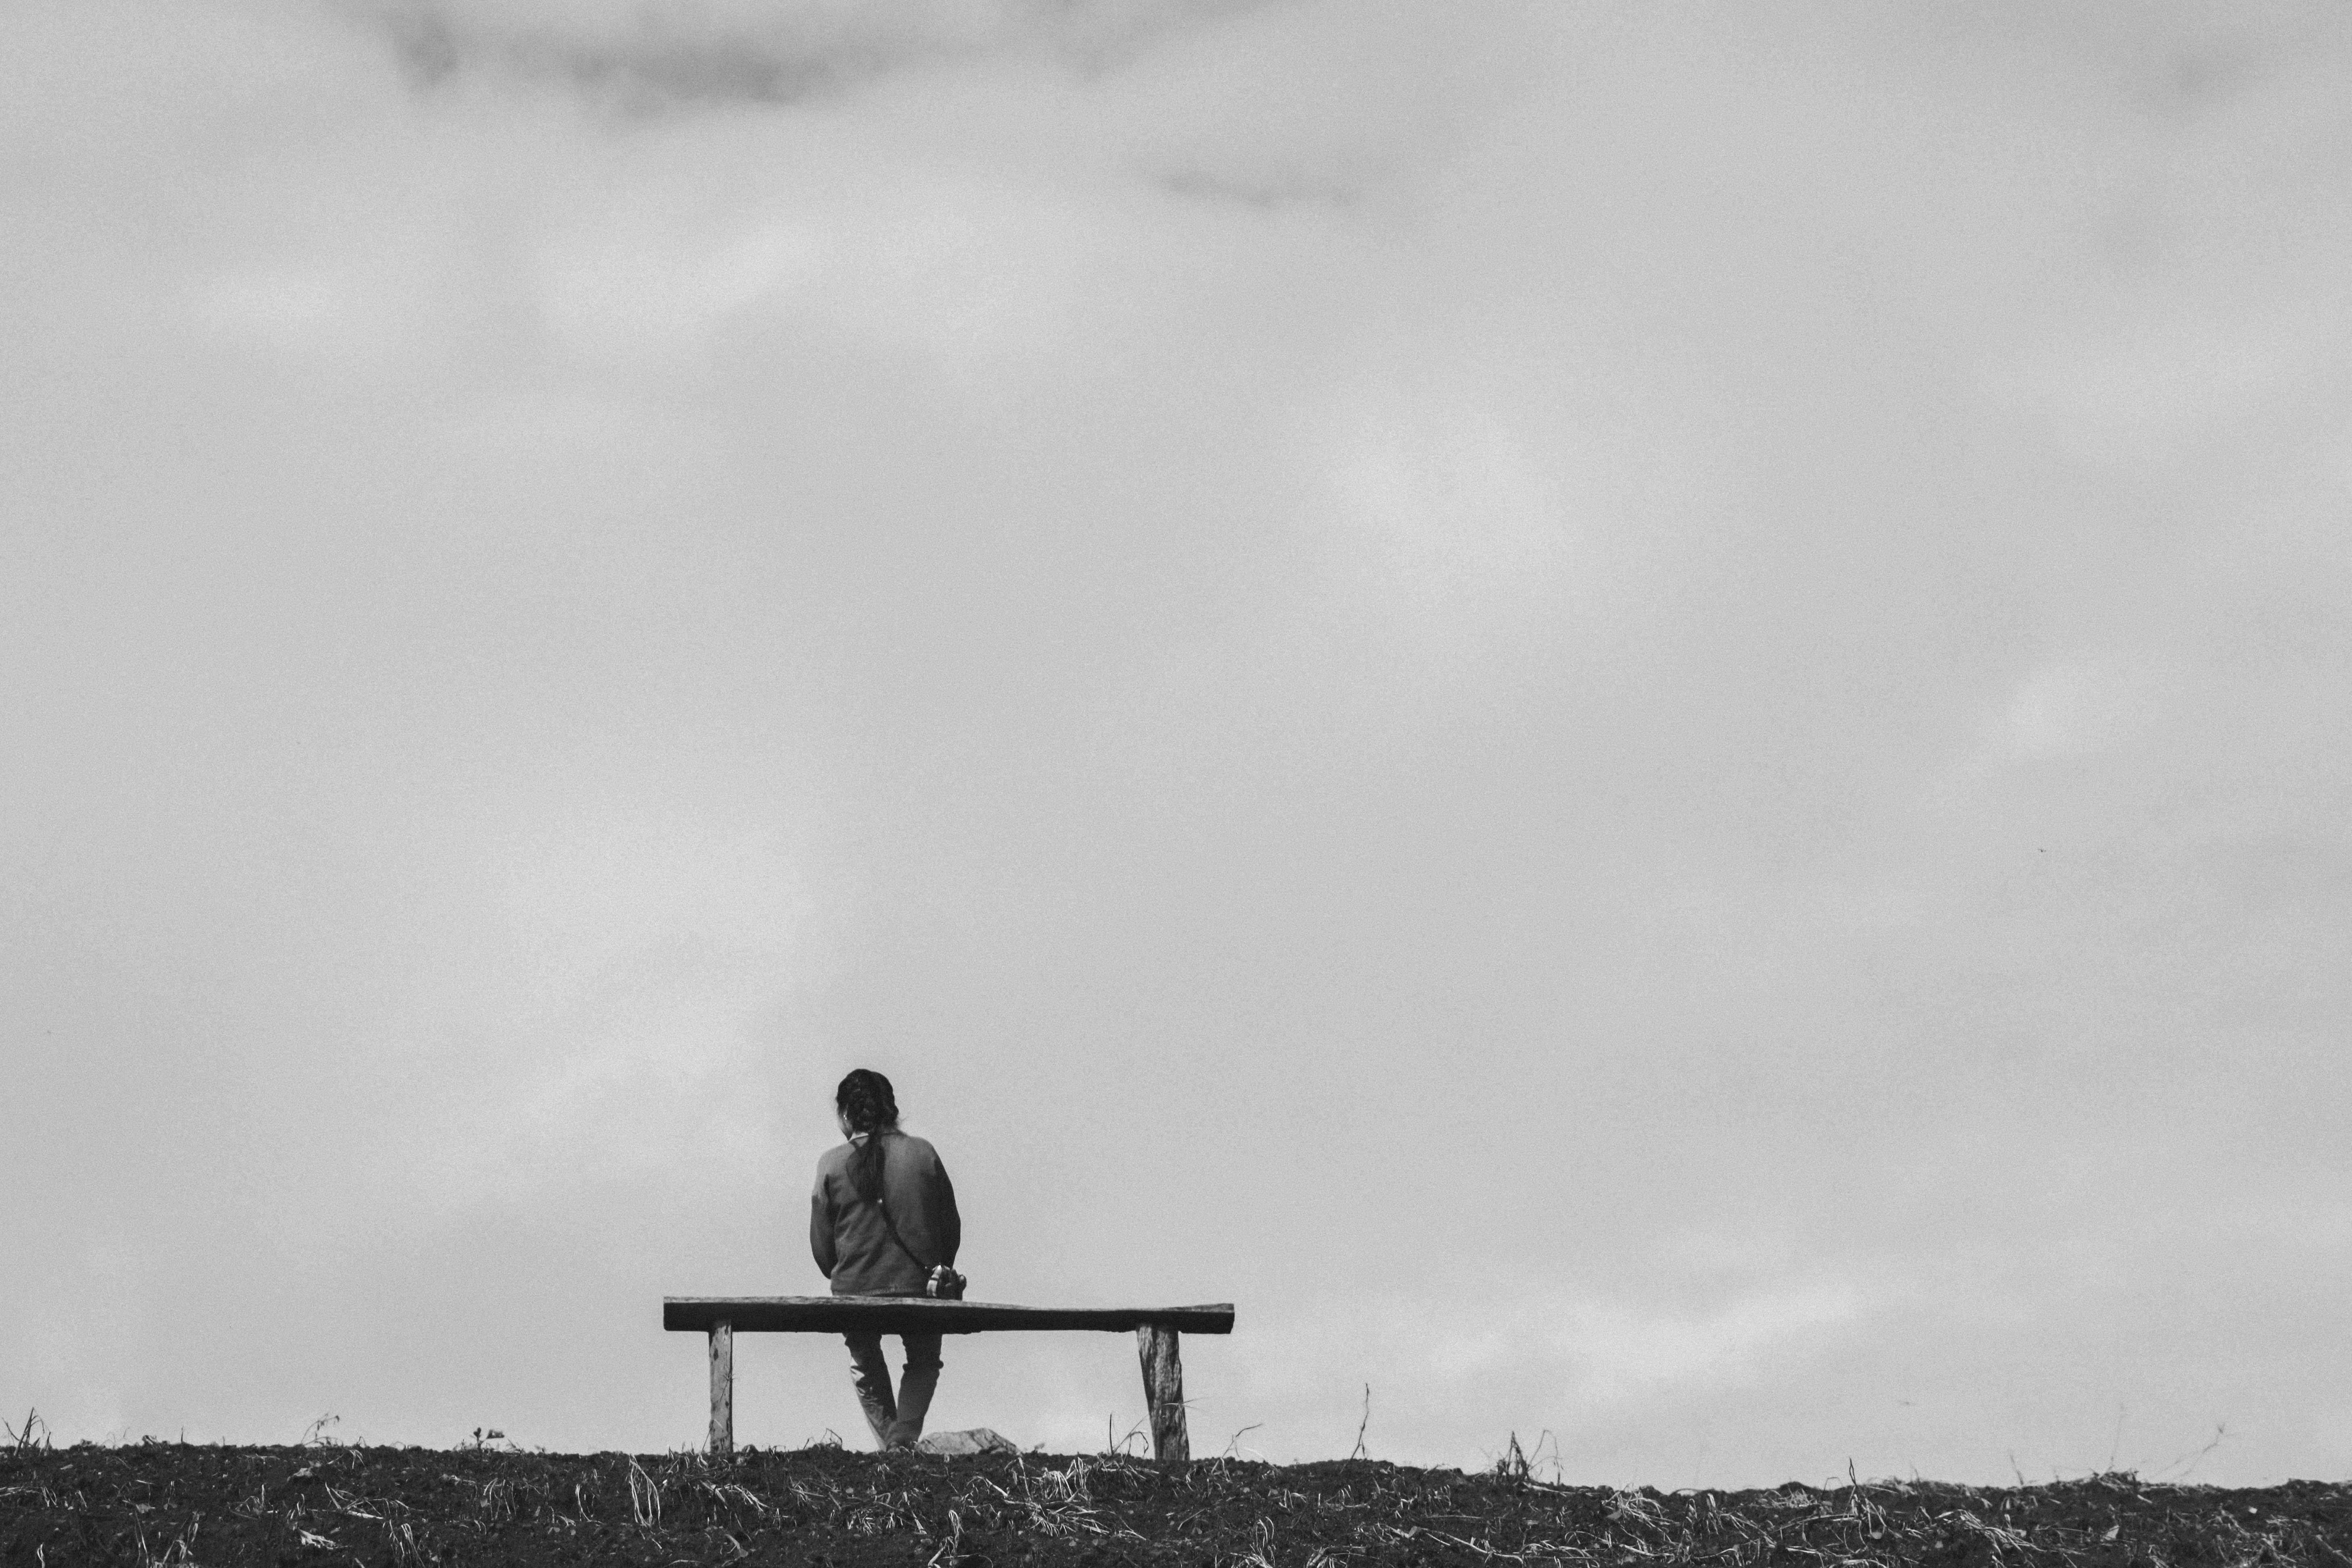 miscellanea, miscellaneous, bw, chb, human, person, loneliness, bench 1080p